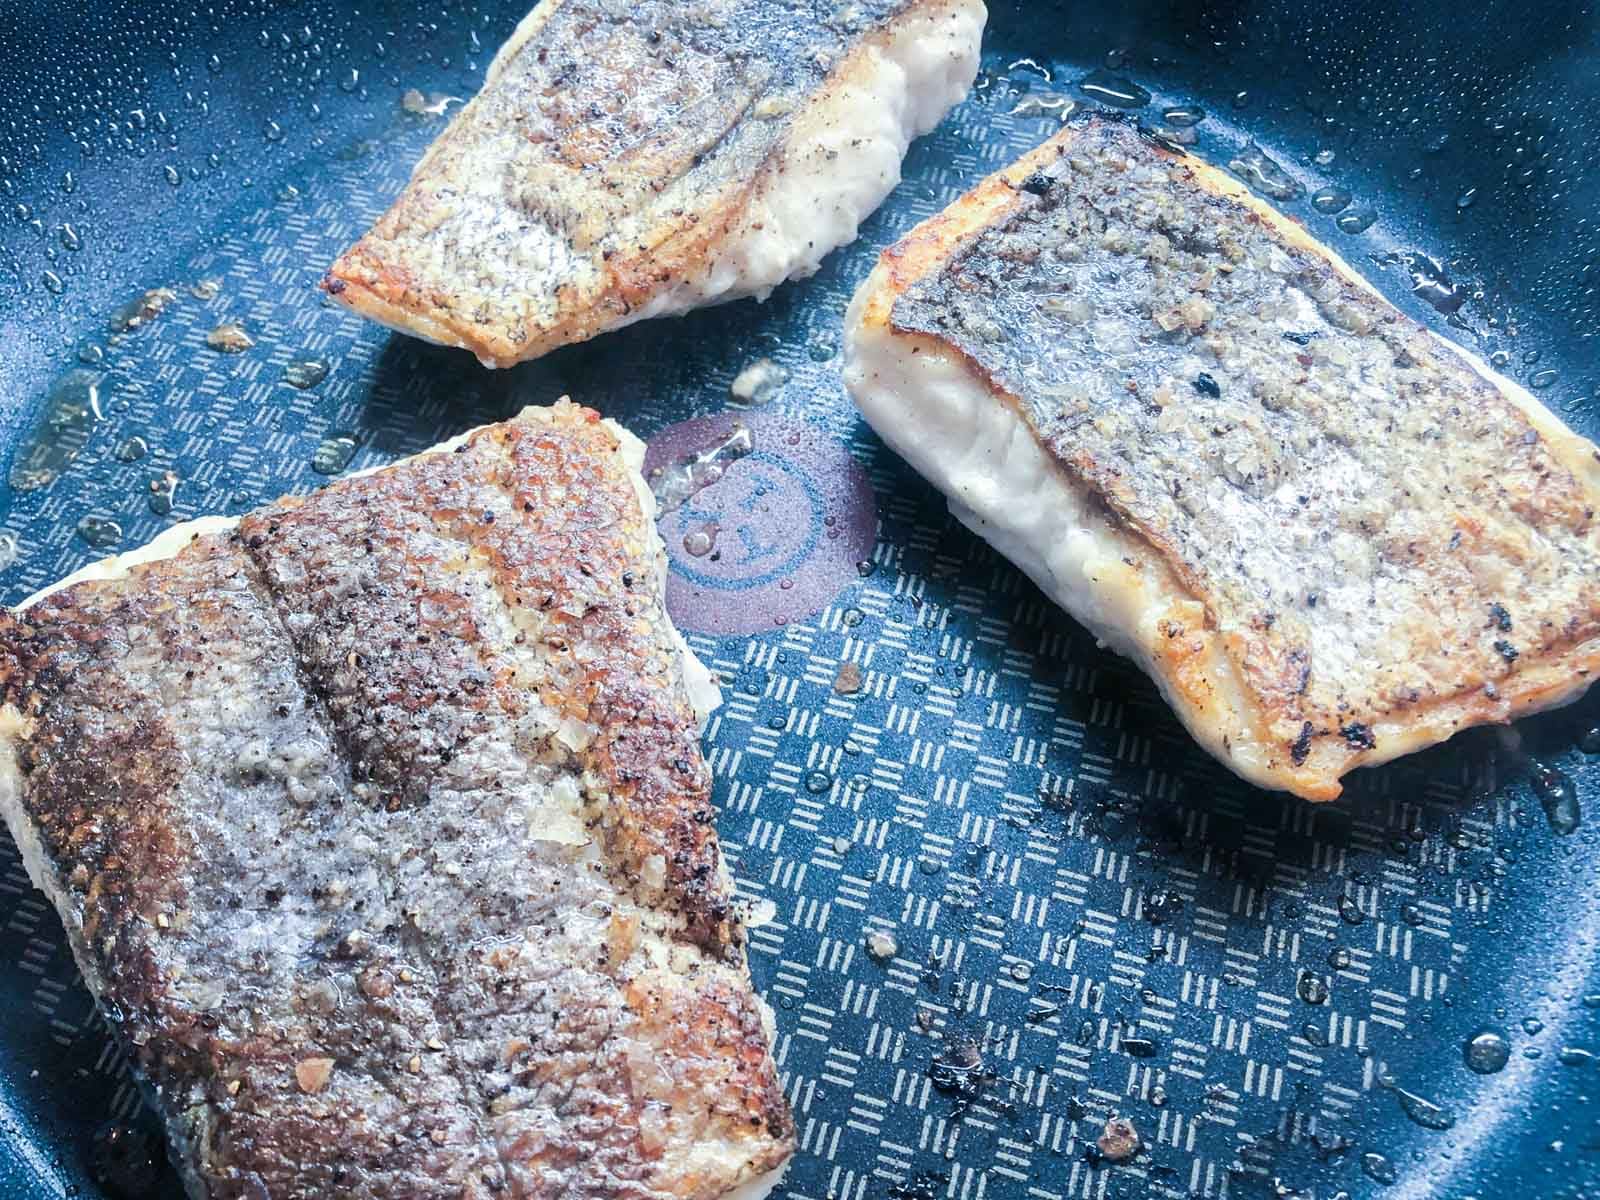 Crispy skined hake fillets in a hot frying pan.